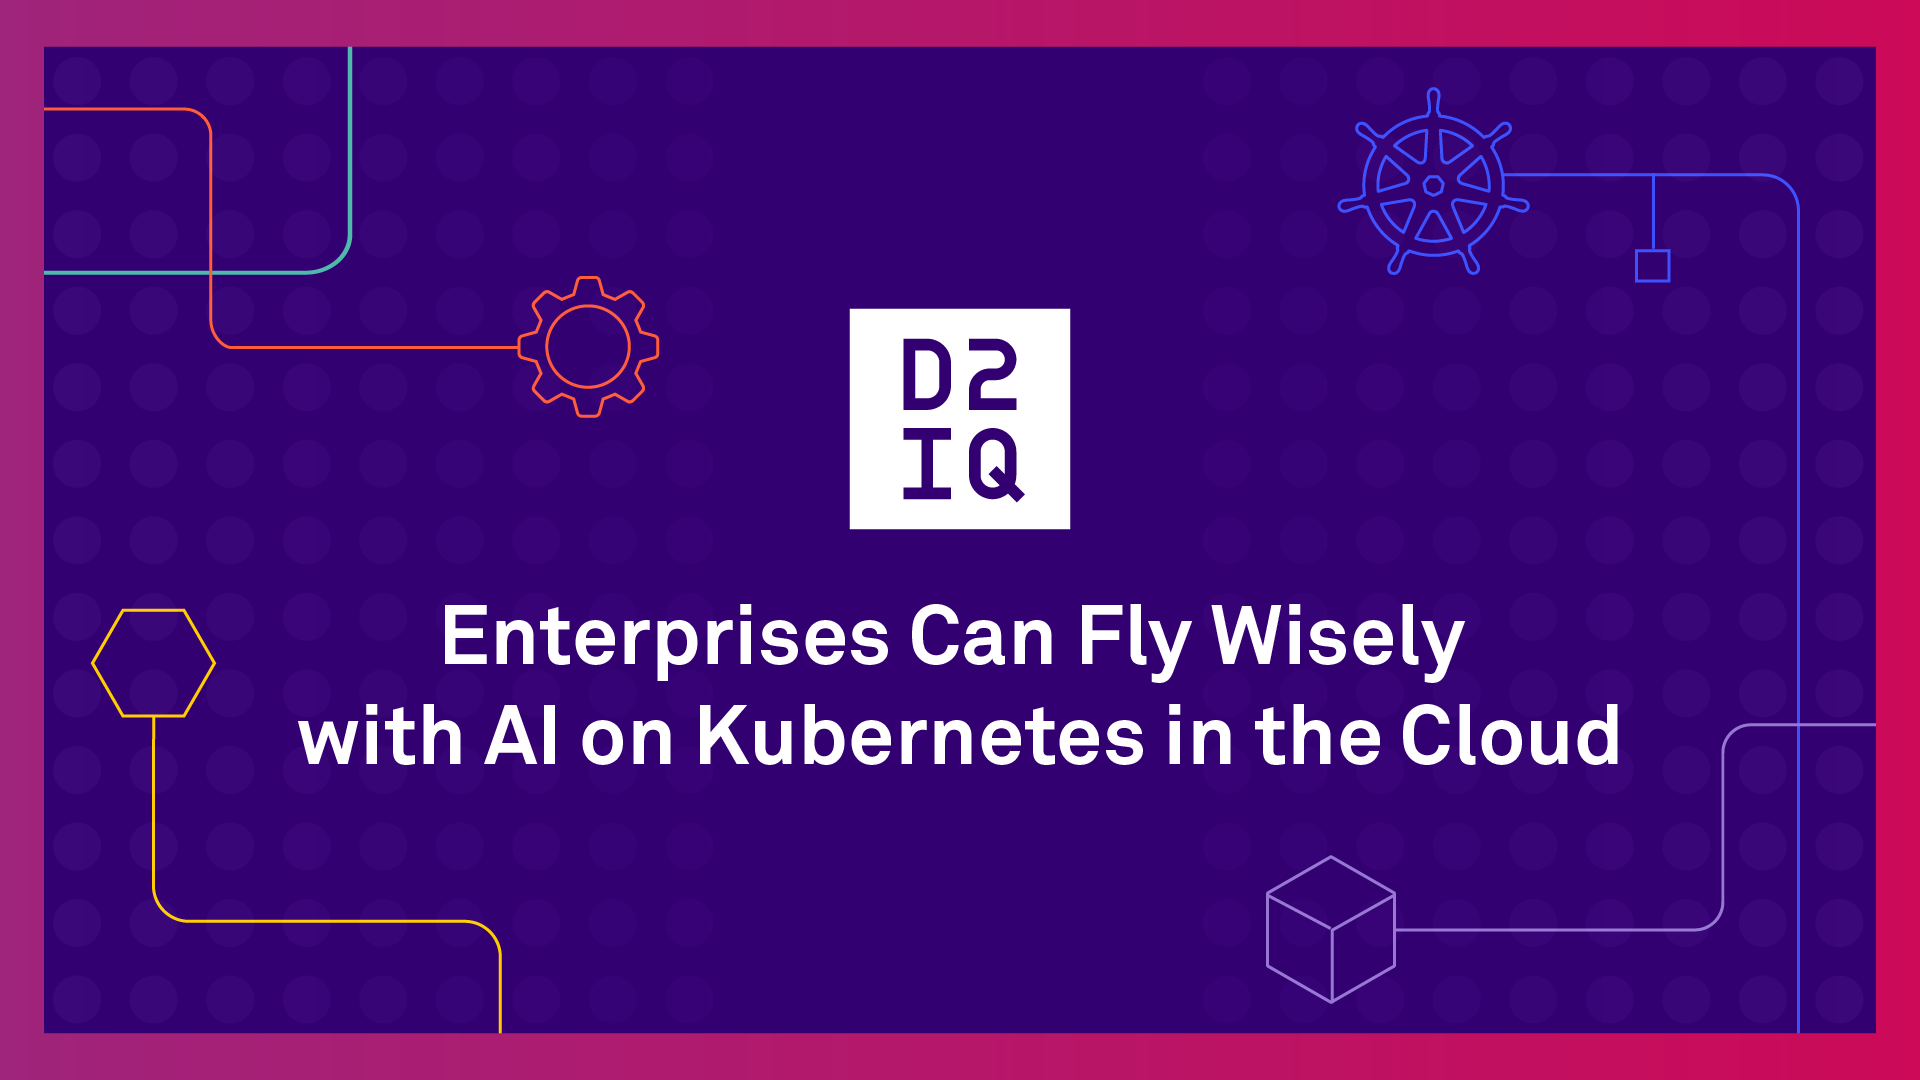 Enterprises Can Fly Wisely with AI on Kubernetes in the Cloud